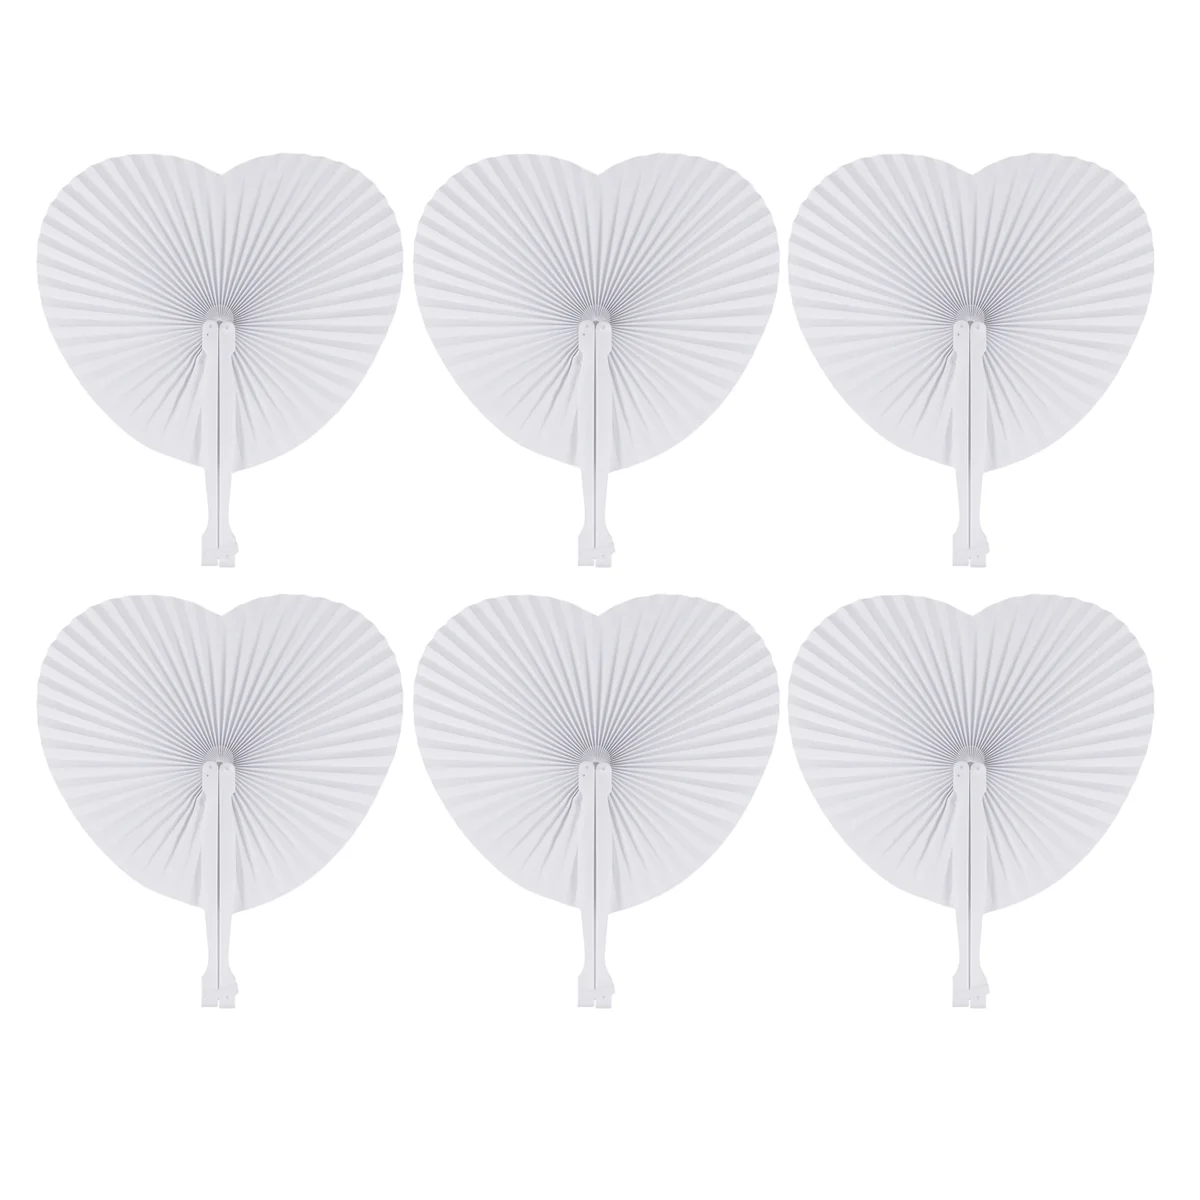 

48 White Paper Fans Hand Fan Blank Folding Fans Wedding Favors Heart Shaped Assortment with Handle for Wedding Celebration